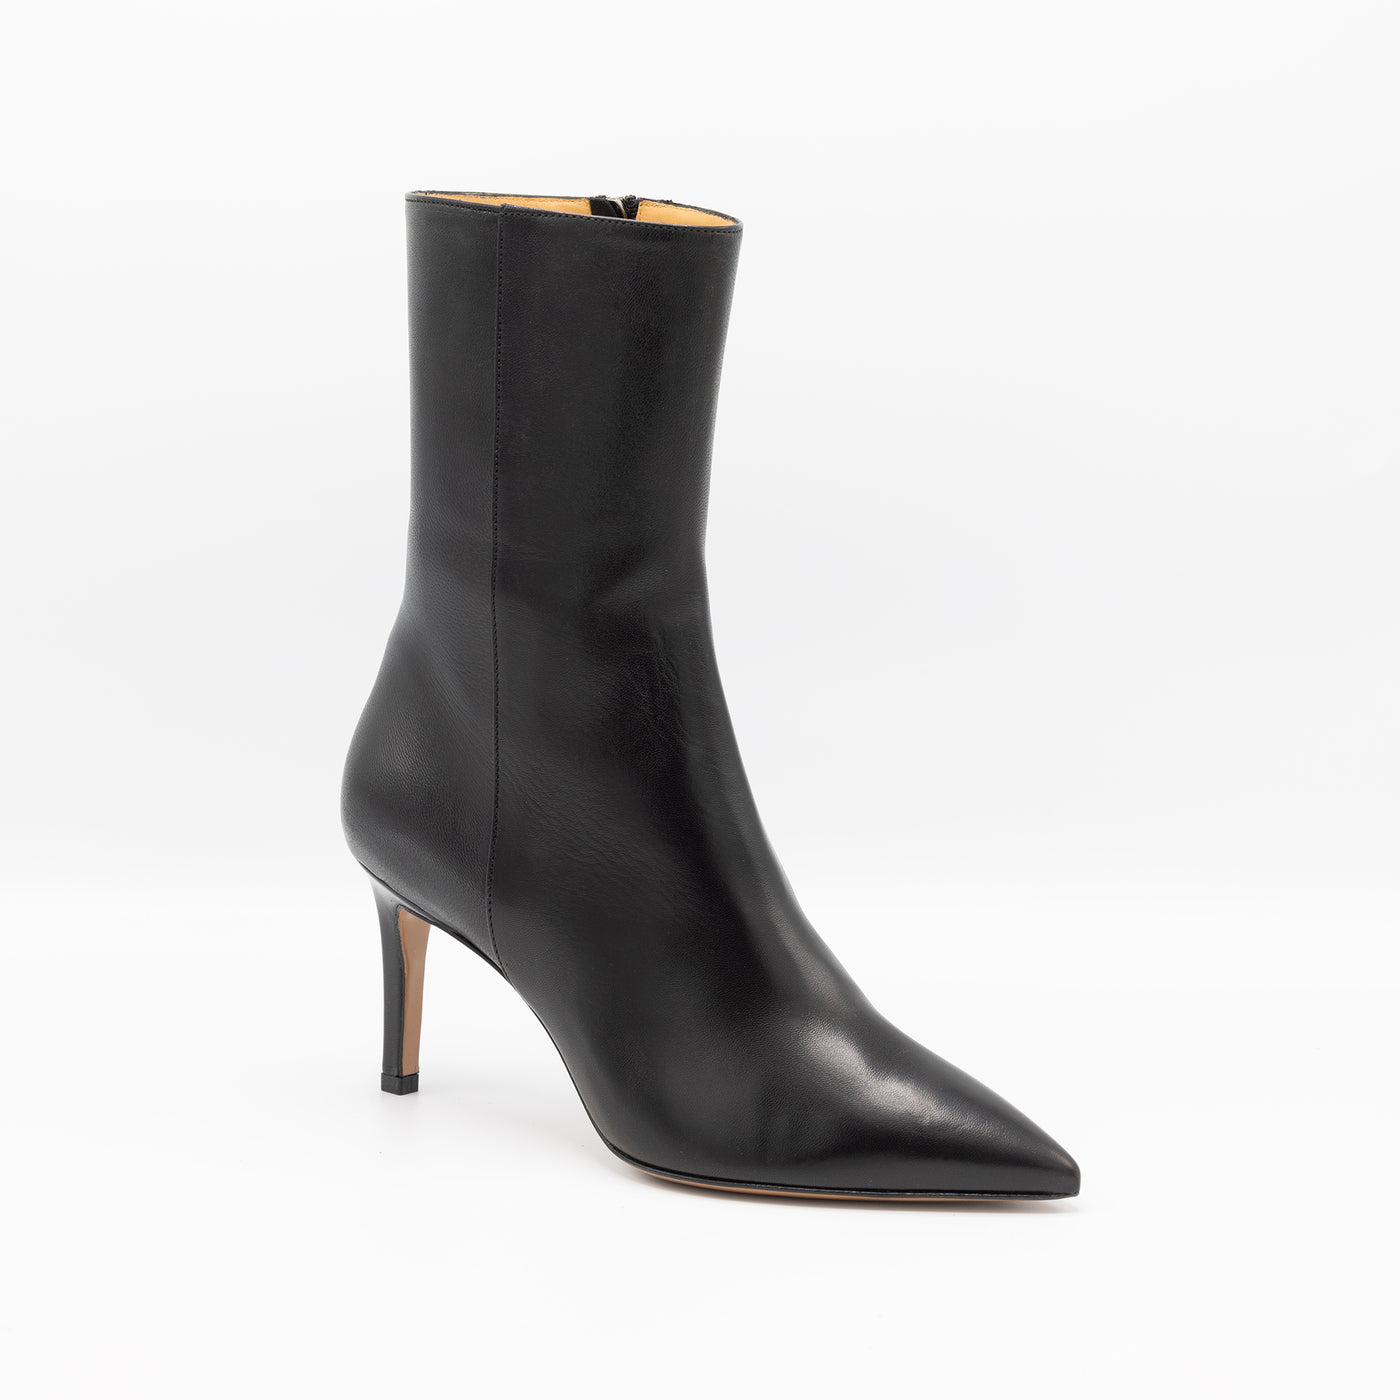 Black leather booties with high shaft and a 85mm stiletto heel and pointy toe. 